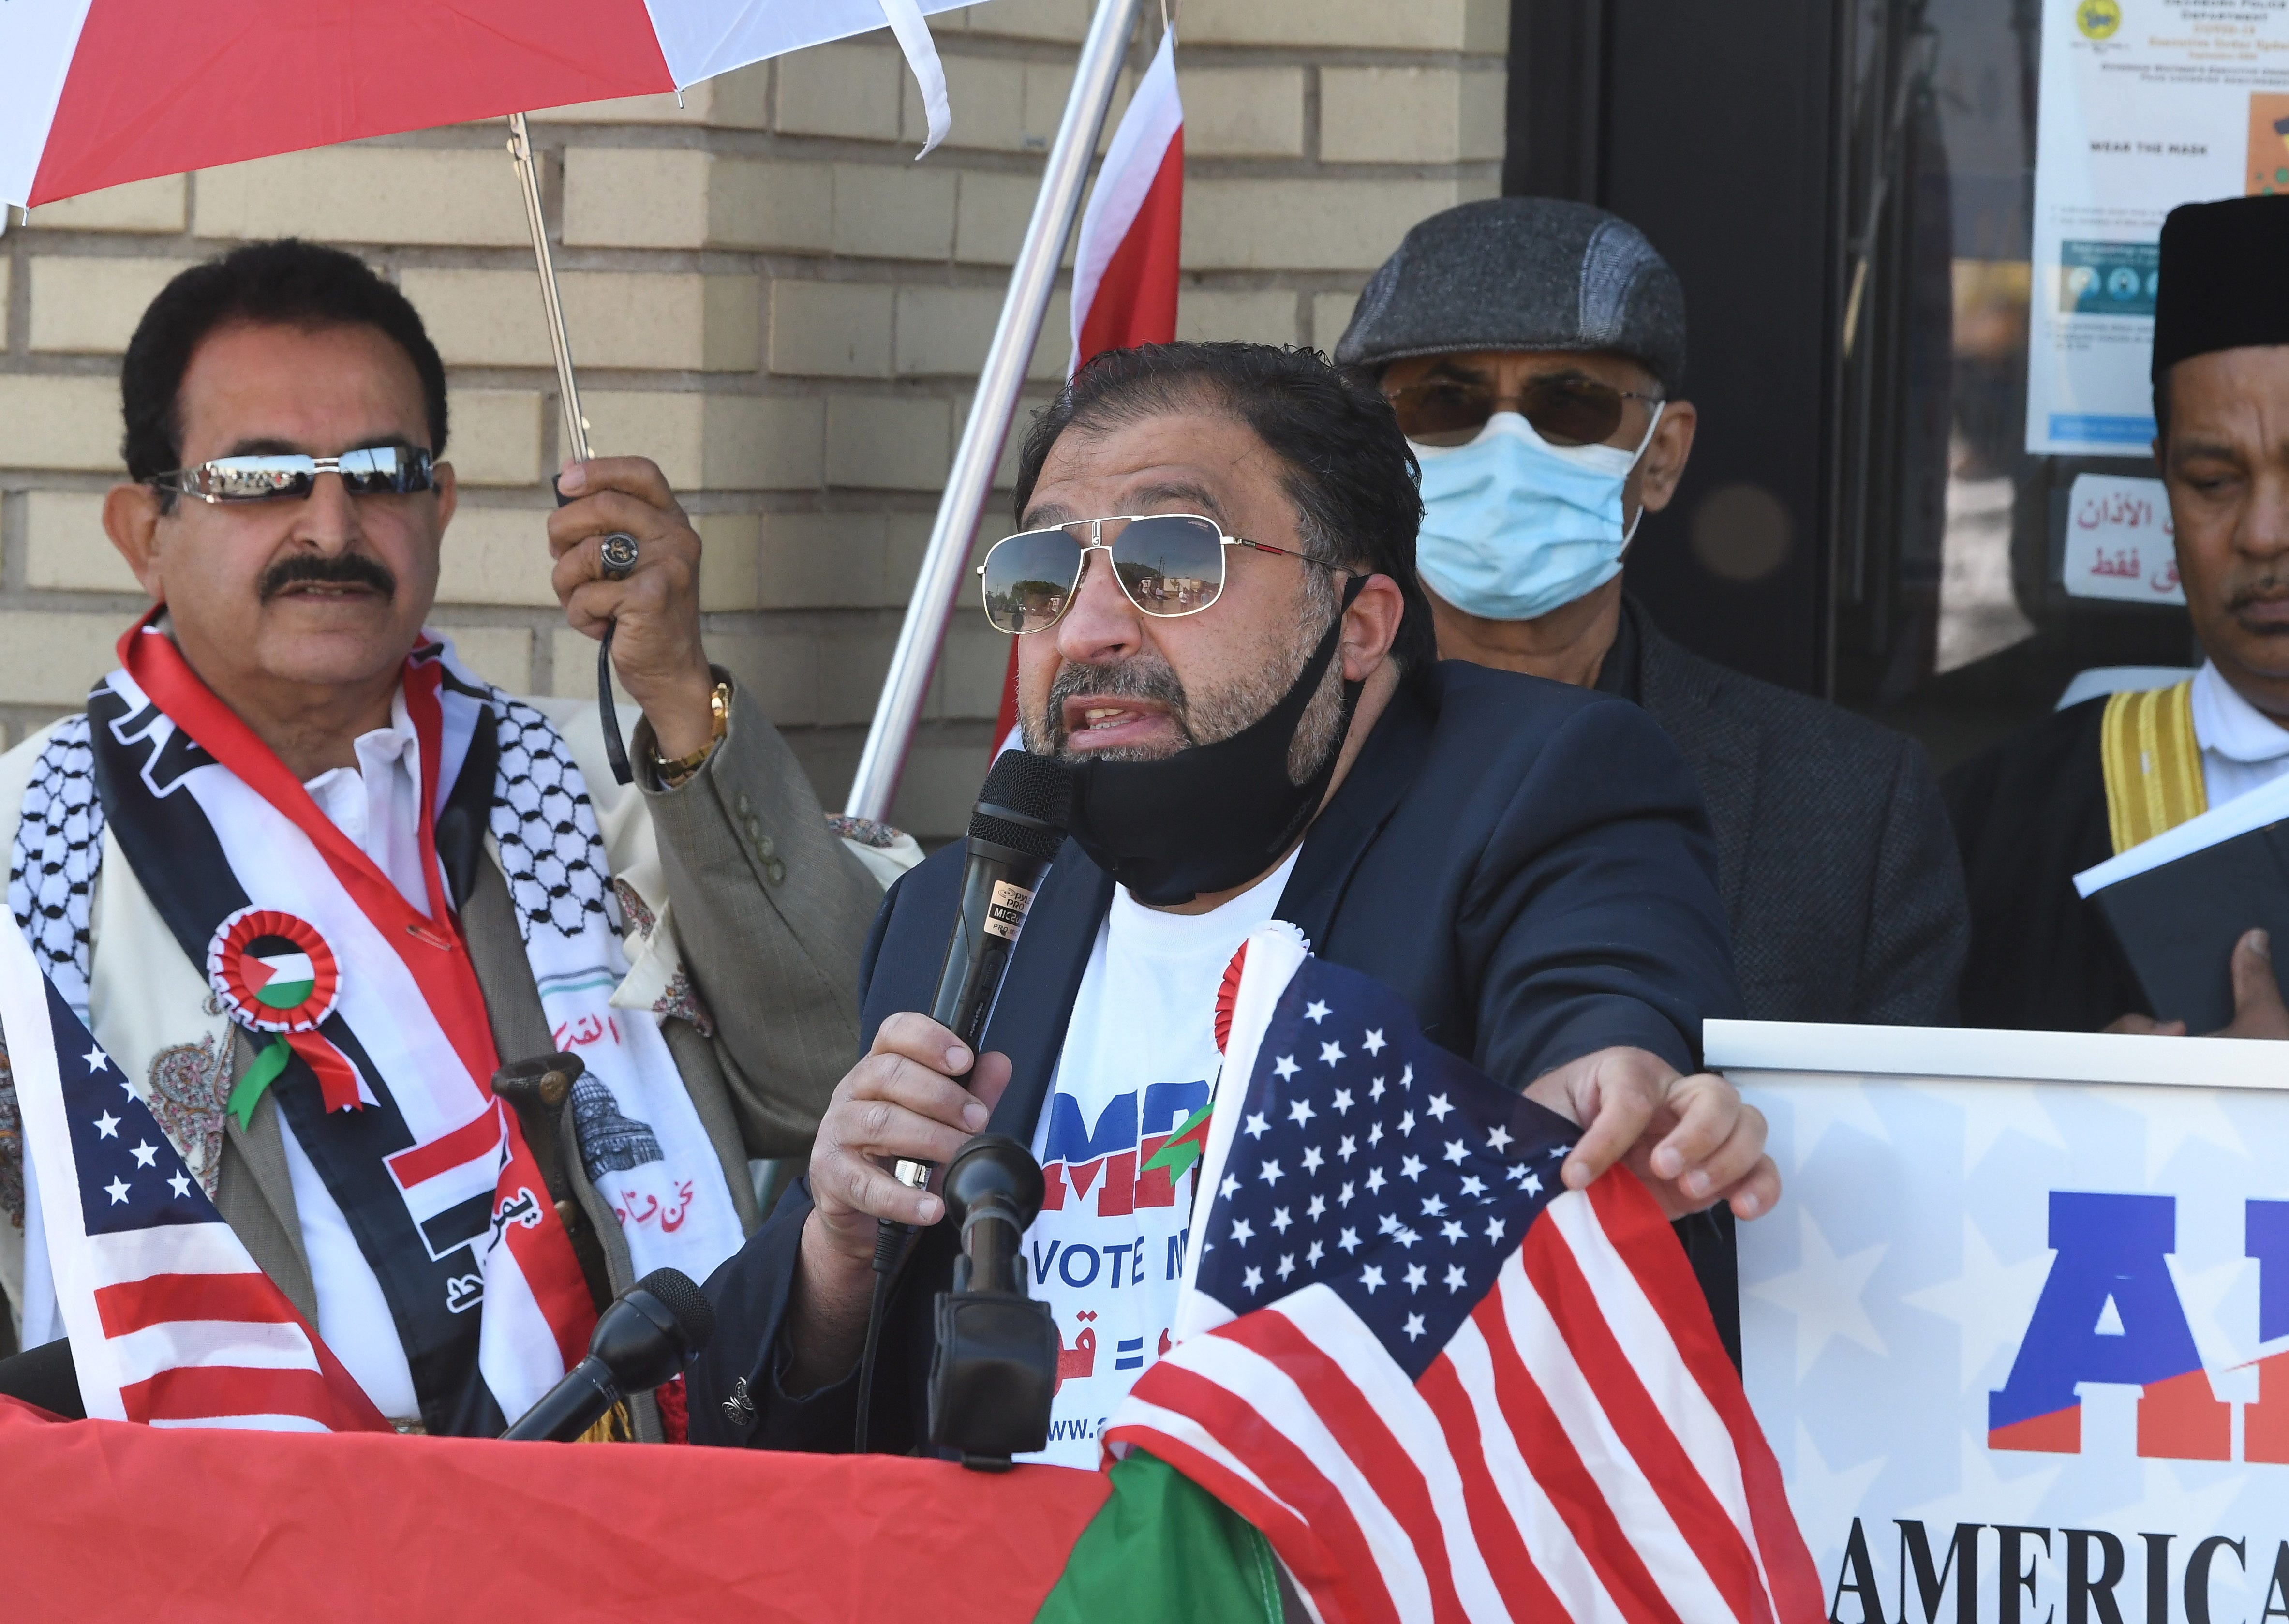 "This flag means justice, this flag means fairness," comments Abdallah Sheik, president of the American Muslim Political Action Committee, AMPAC during a news conference to urge the Biden administration take immediate action at the AMS Mosque in Dearborn, Michigan on May 18, 2021.